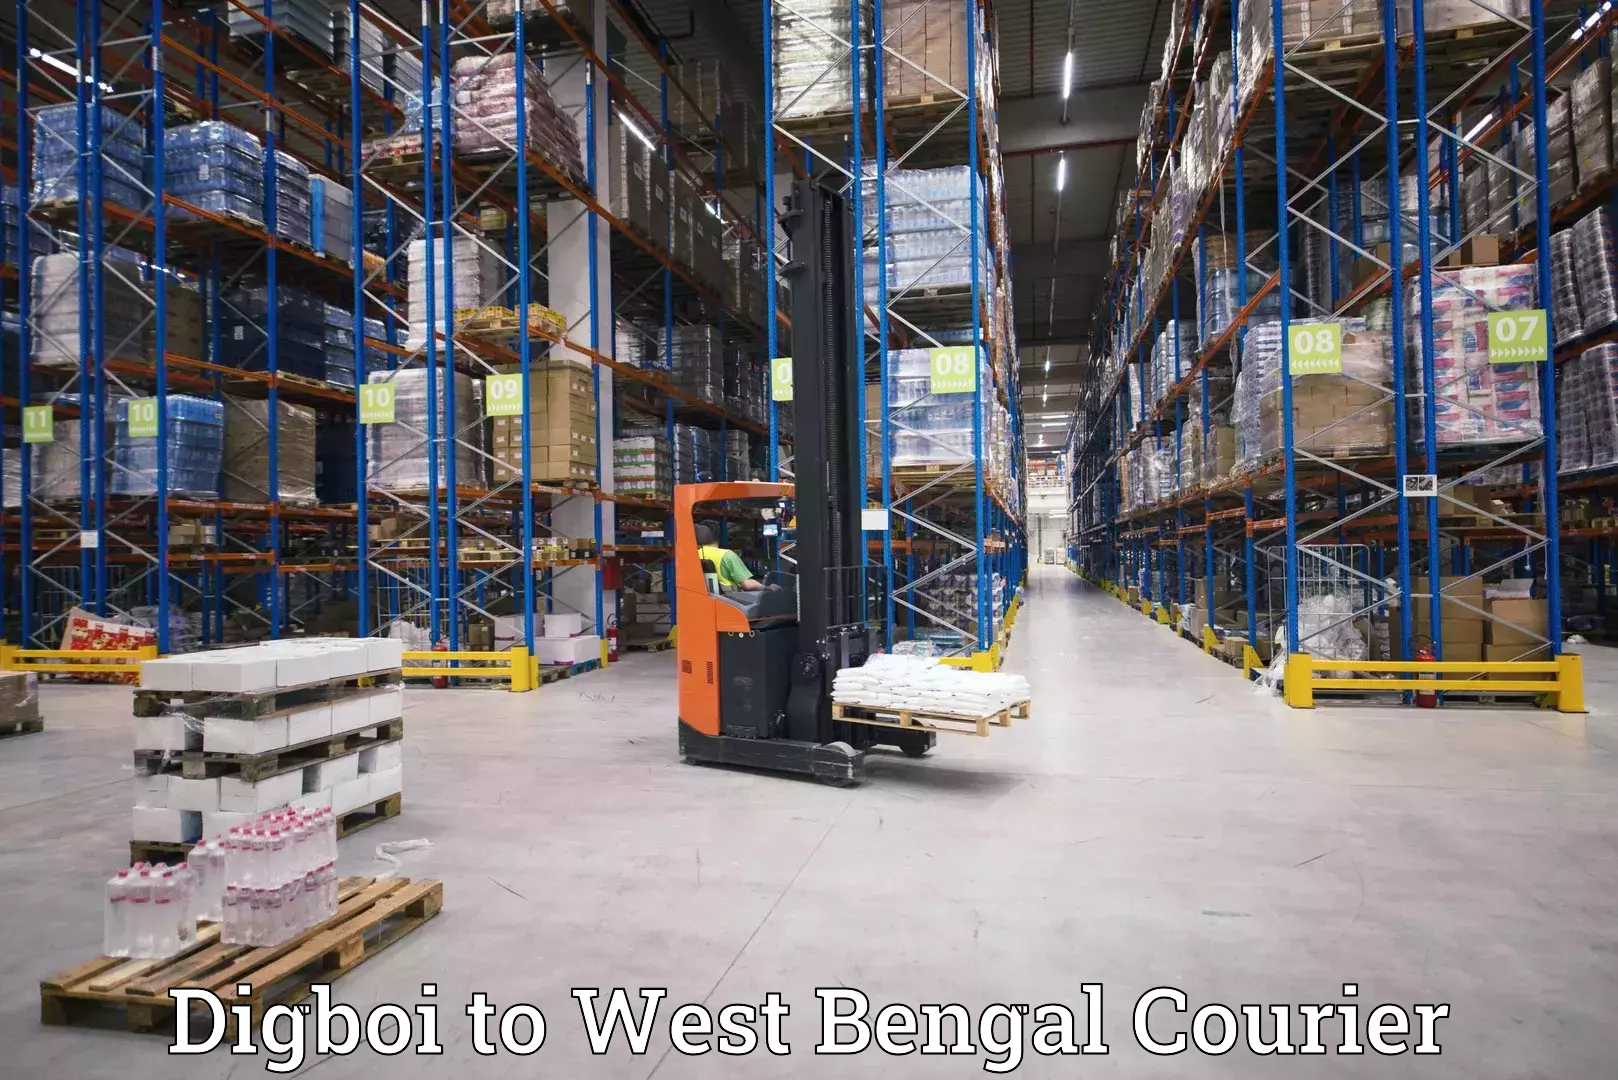 High-speed parcel service Digboi to West Bengal